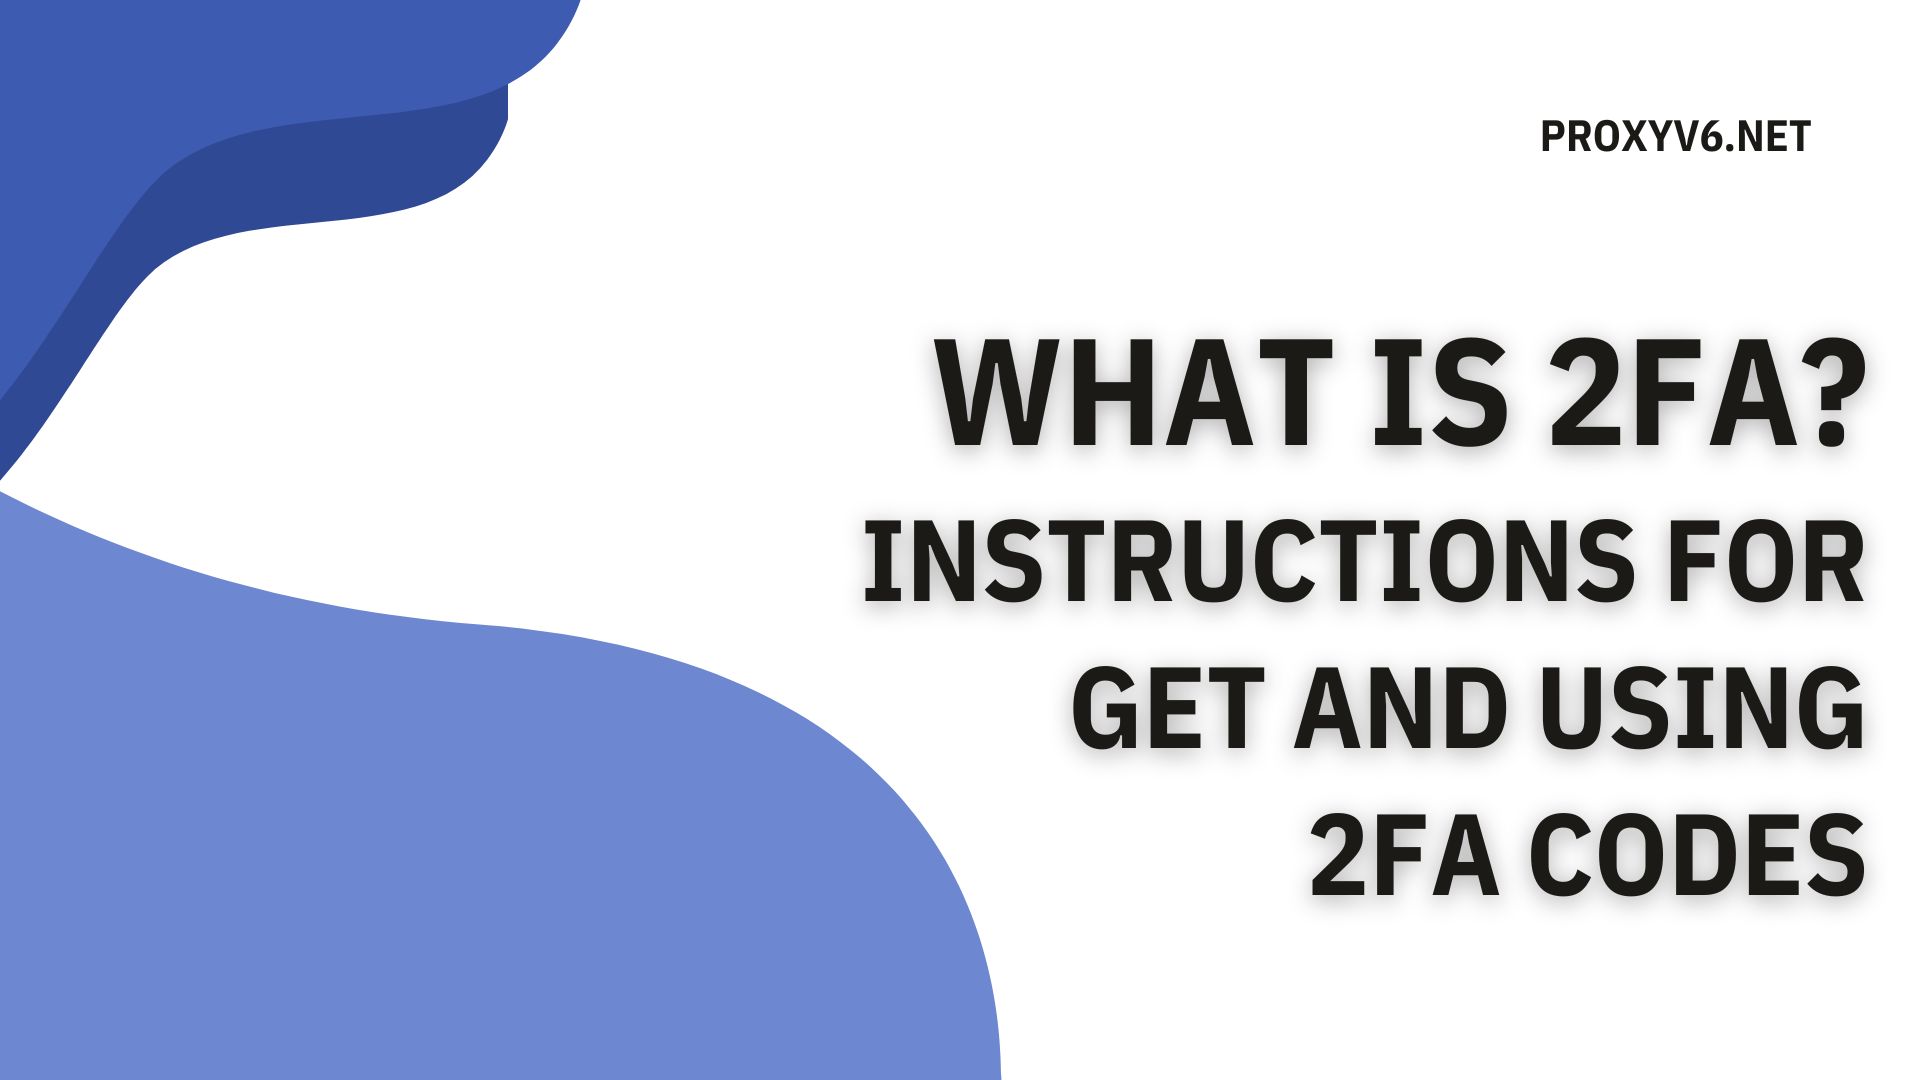 What is 2FA? Instructions for get and using 2FA codes